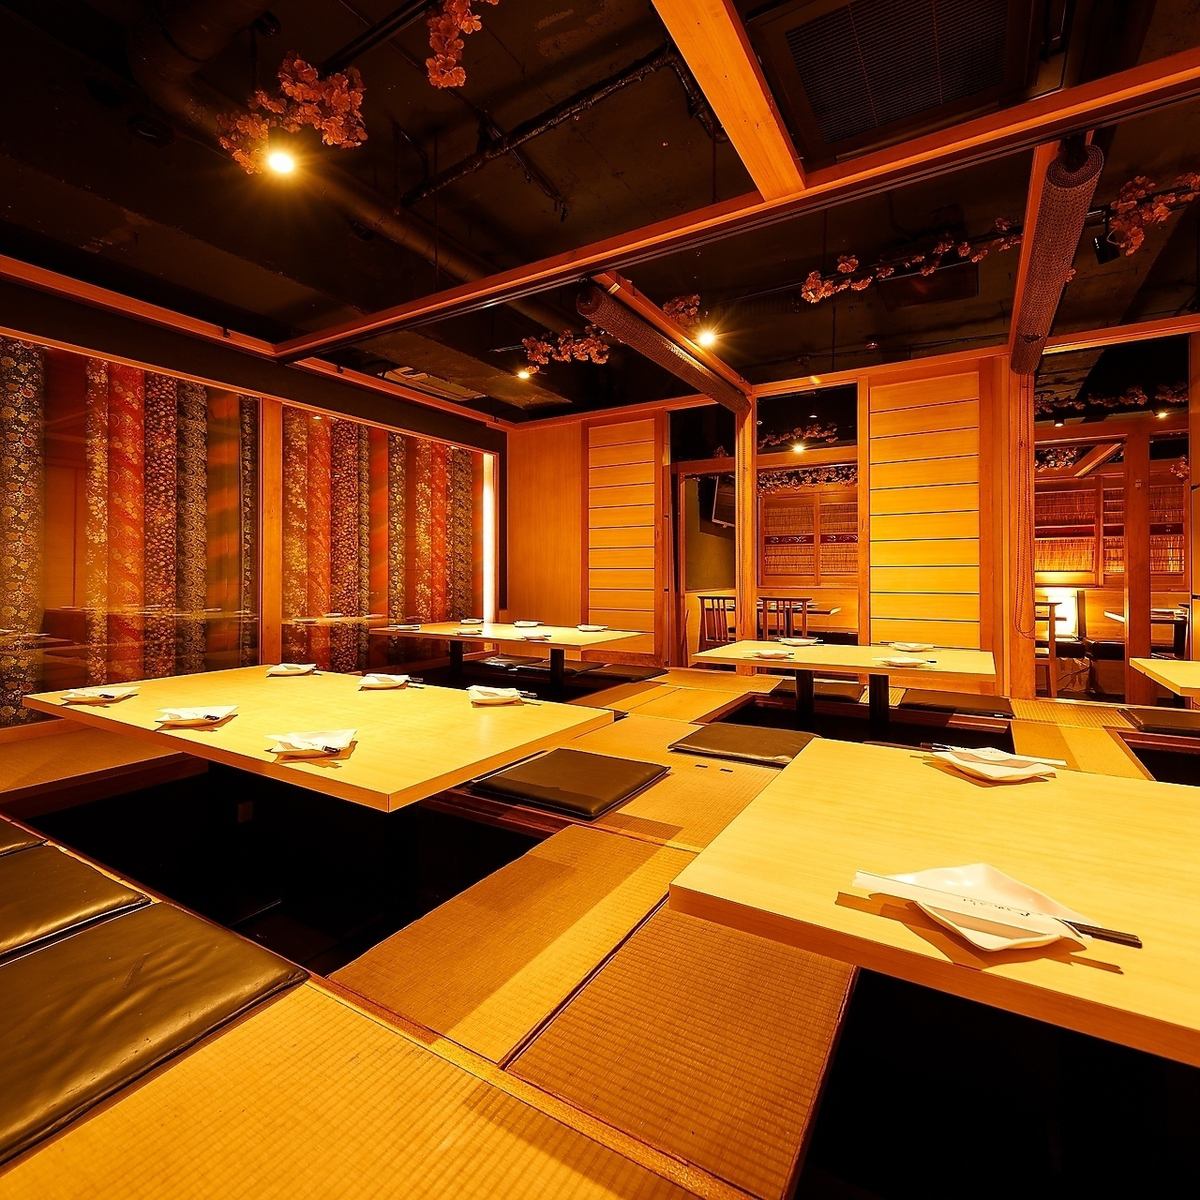 We offer private space! We have sunken kotatsu and completely private rooms!